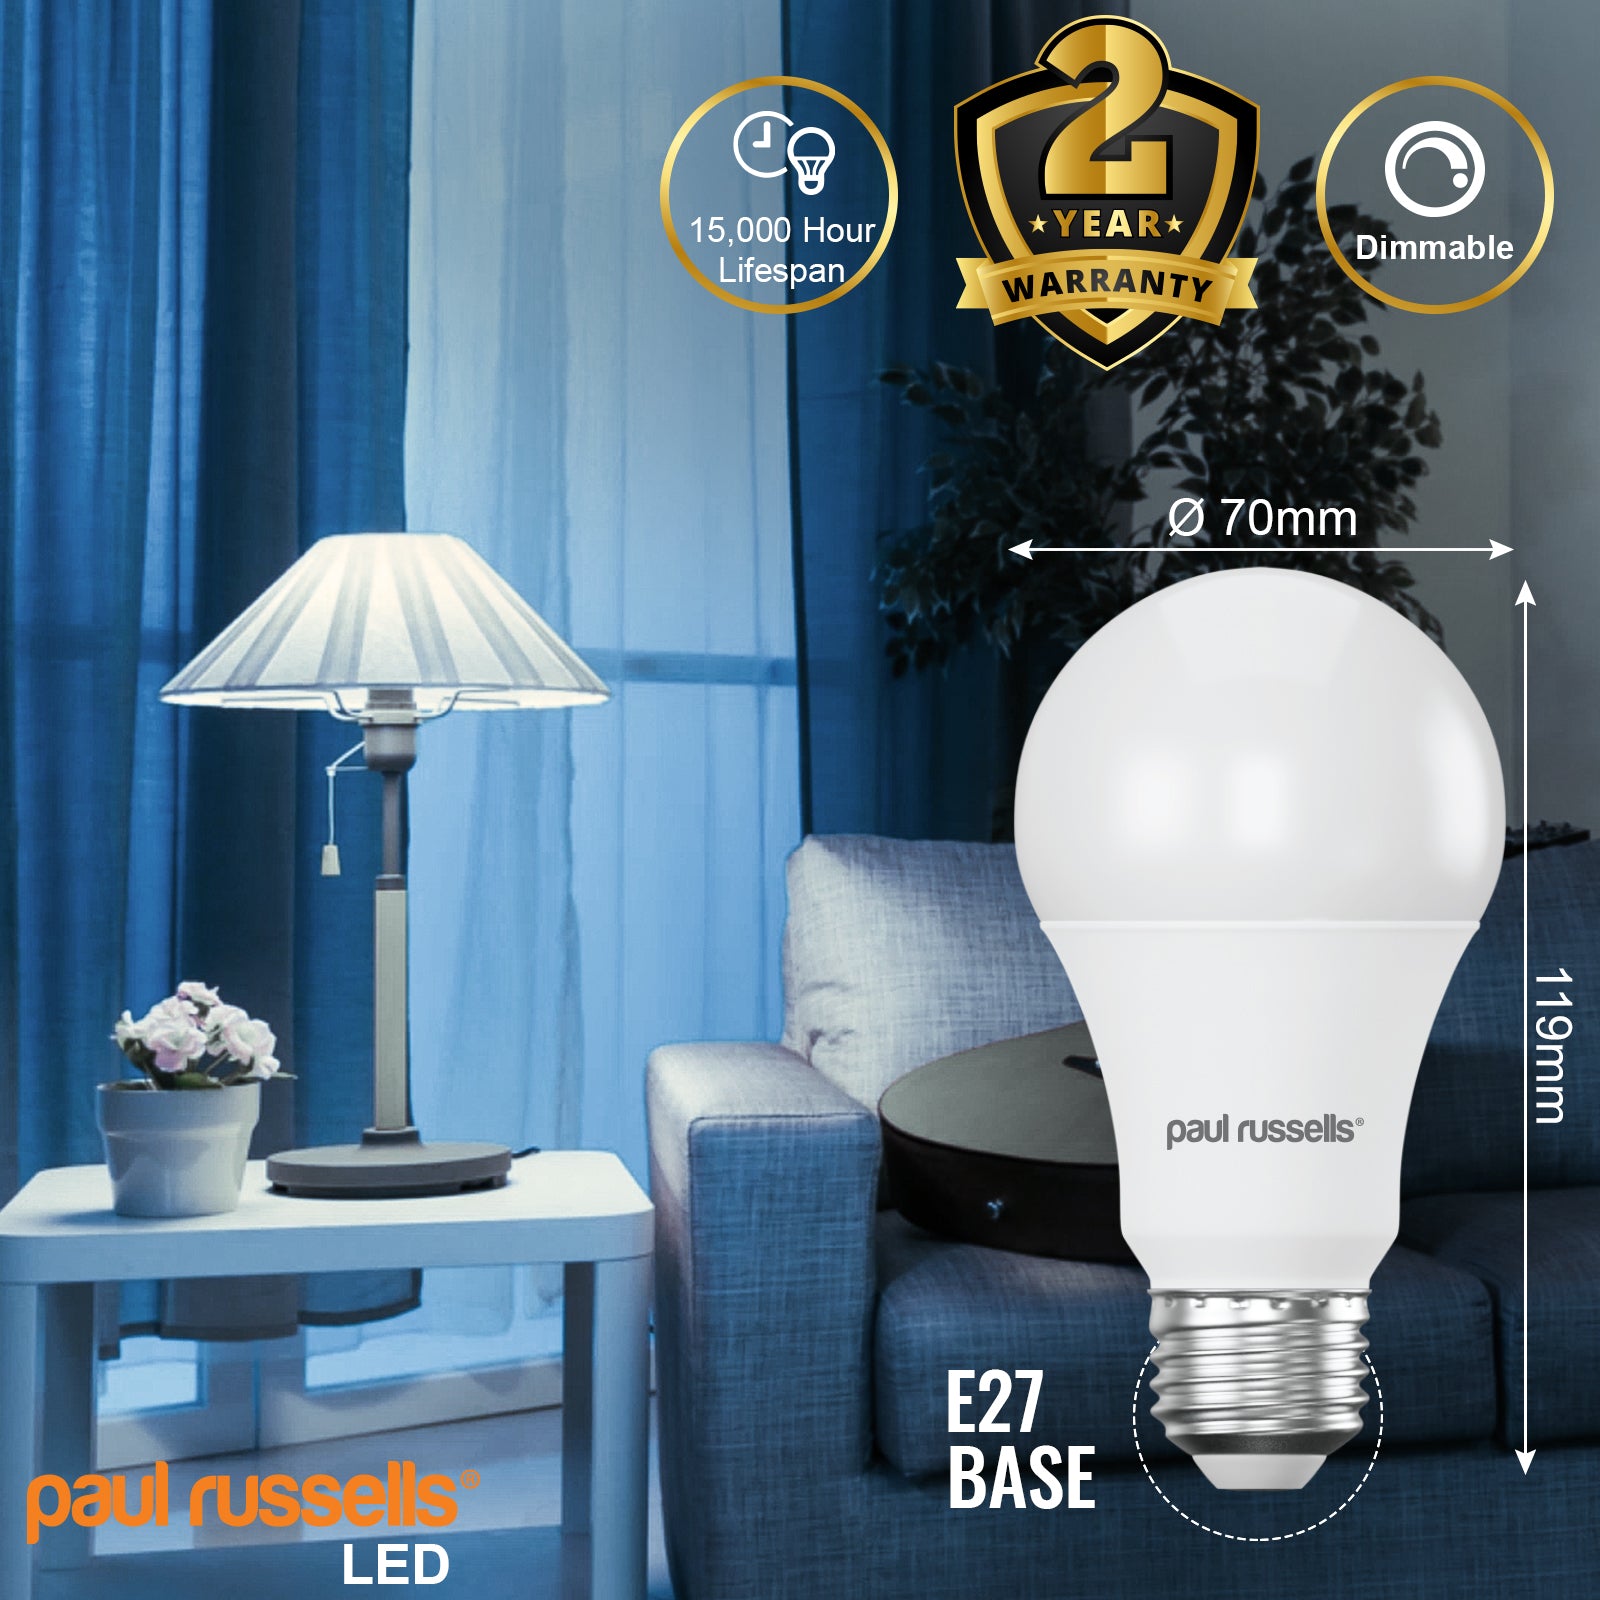 LED Dimmable GLS 14W=100W Day Light Edison Screw ES E27 Bulbs